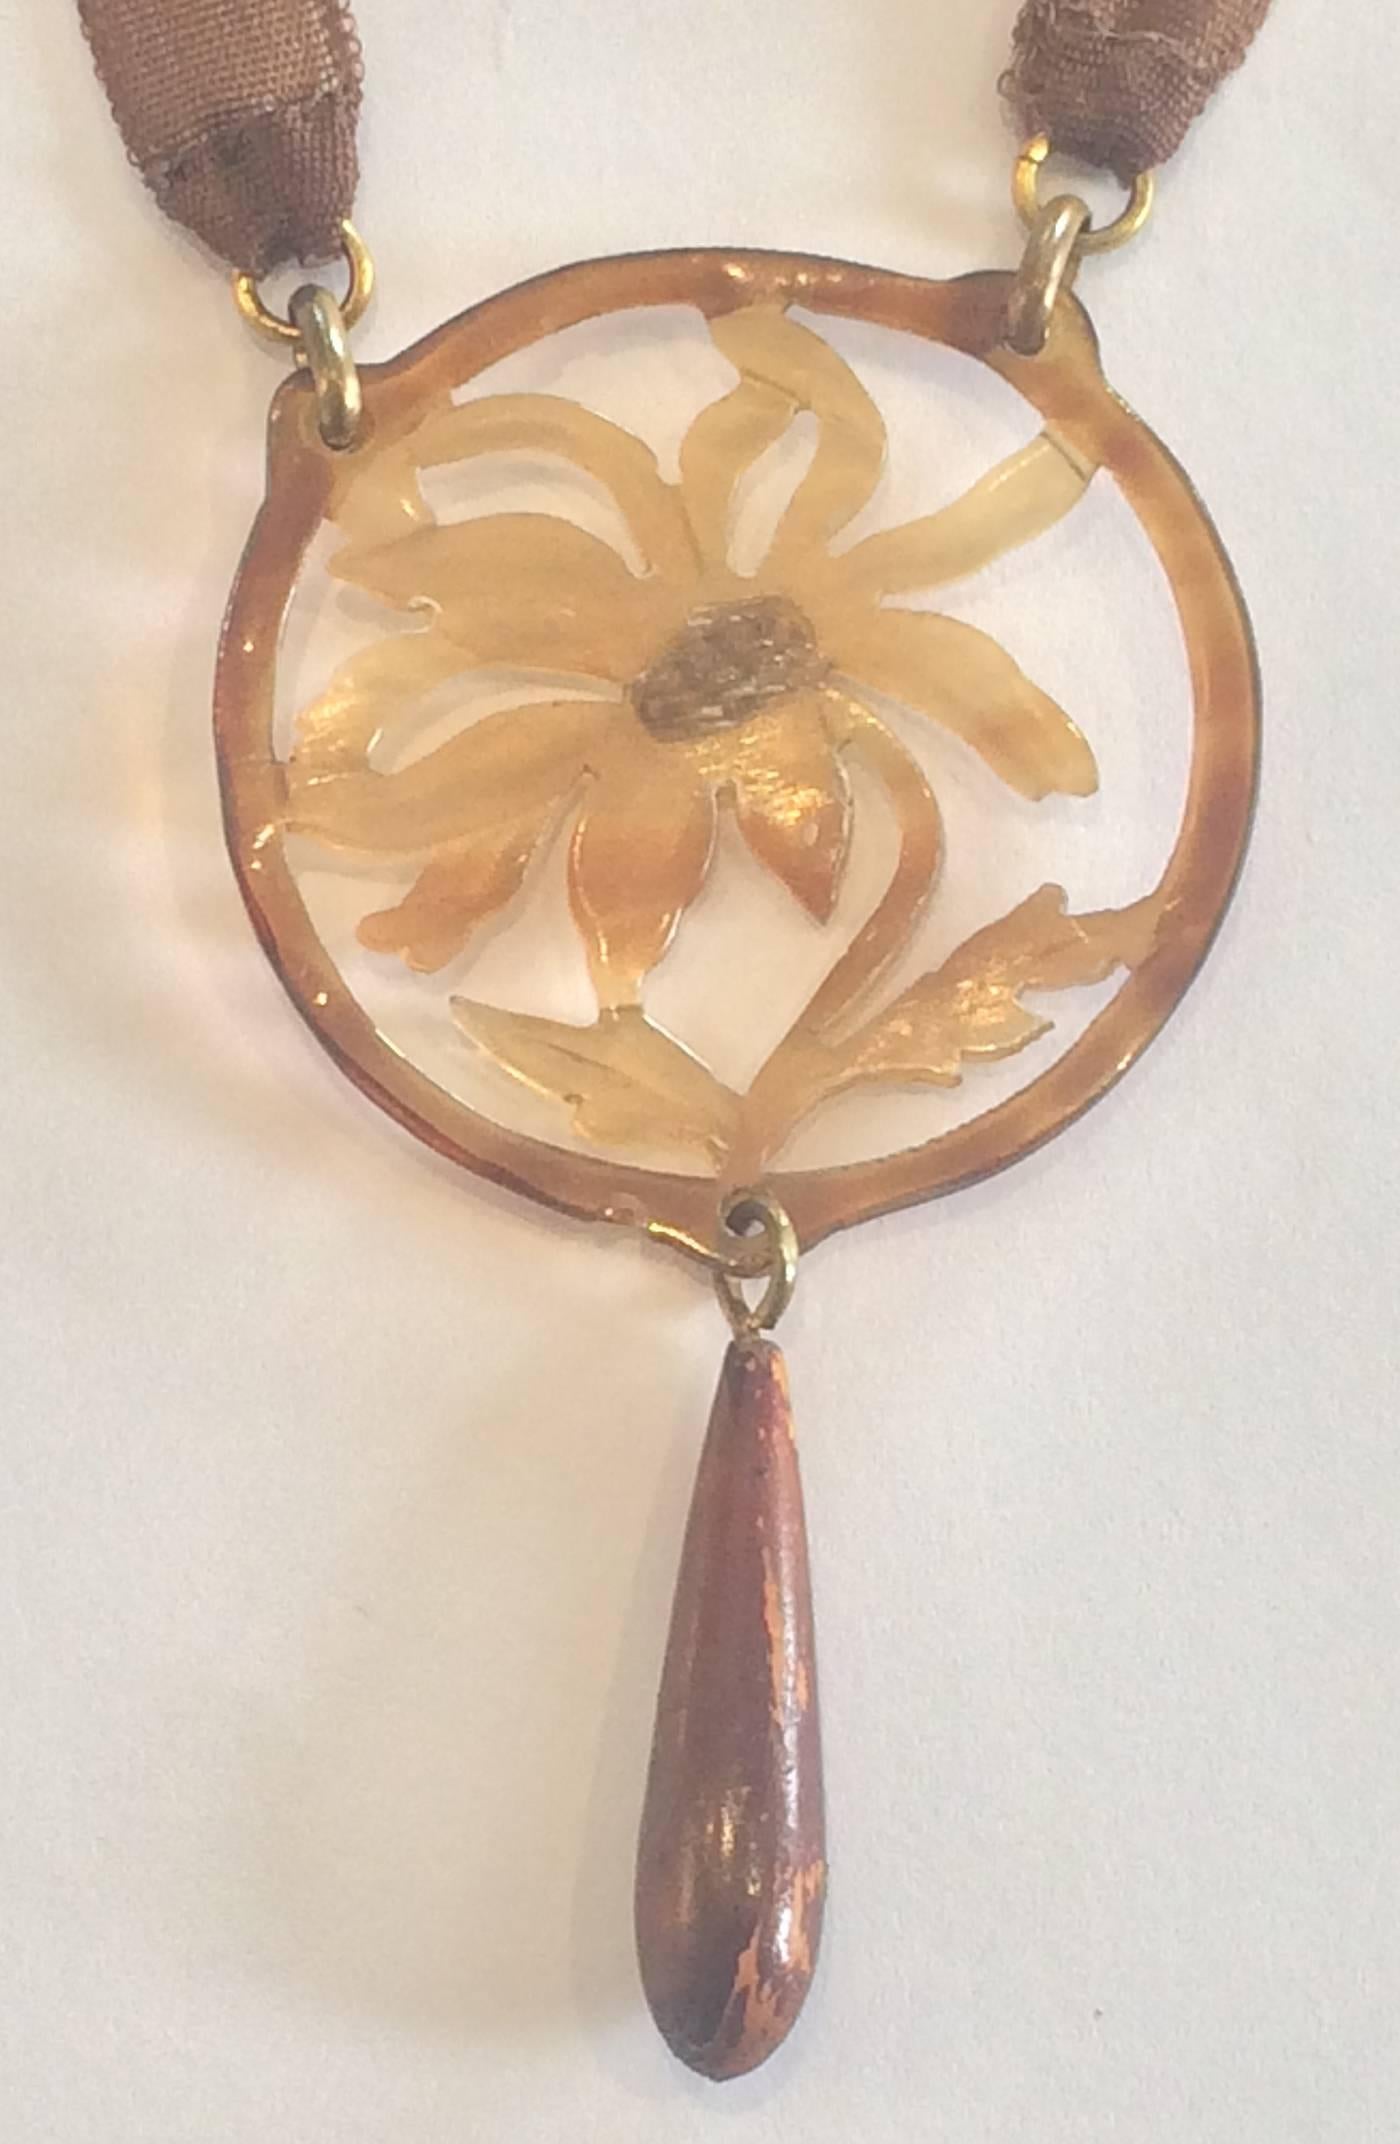 Art Nouveau Rare Necklace of Carved Horn, hand coloured and stained, decorated as a flower. Very fine detail, and the simple Tan silk neck band emphasises the fine pendant. Design by Georges Pierre, signed to rear.  Dimensions are approx..: Pendant